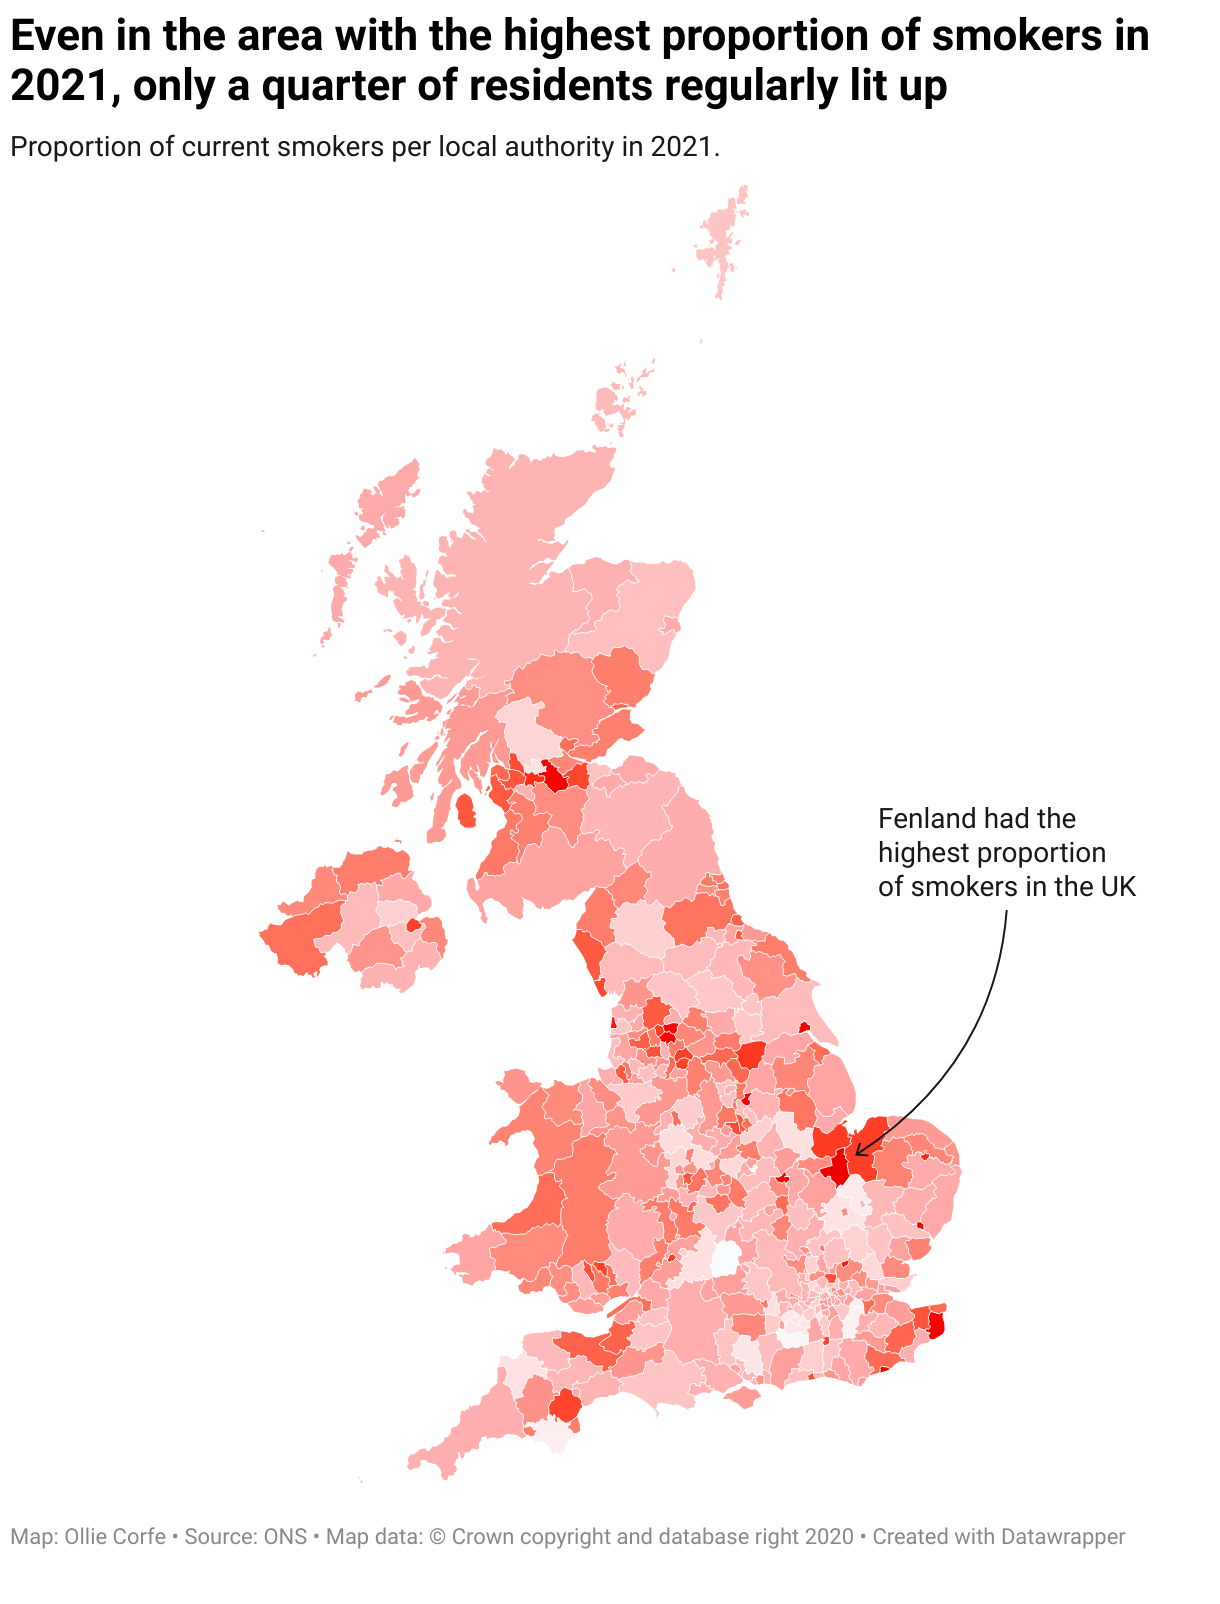 Map of smoker proportions per local authority in the UK.